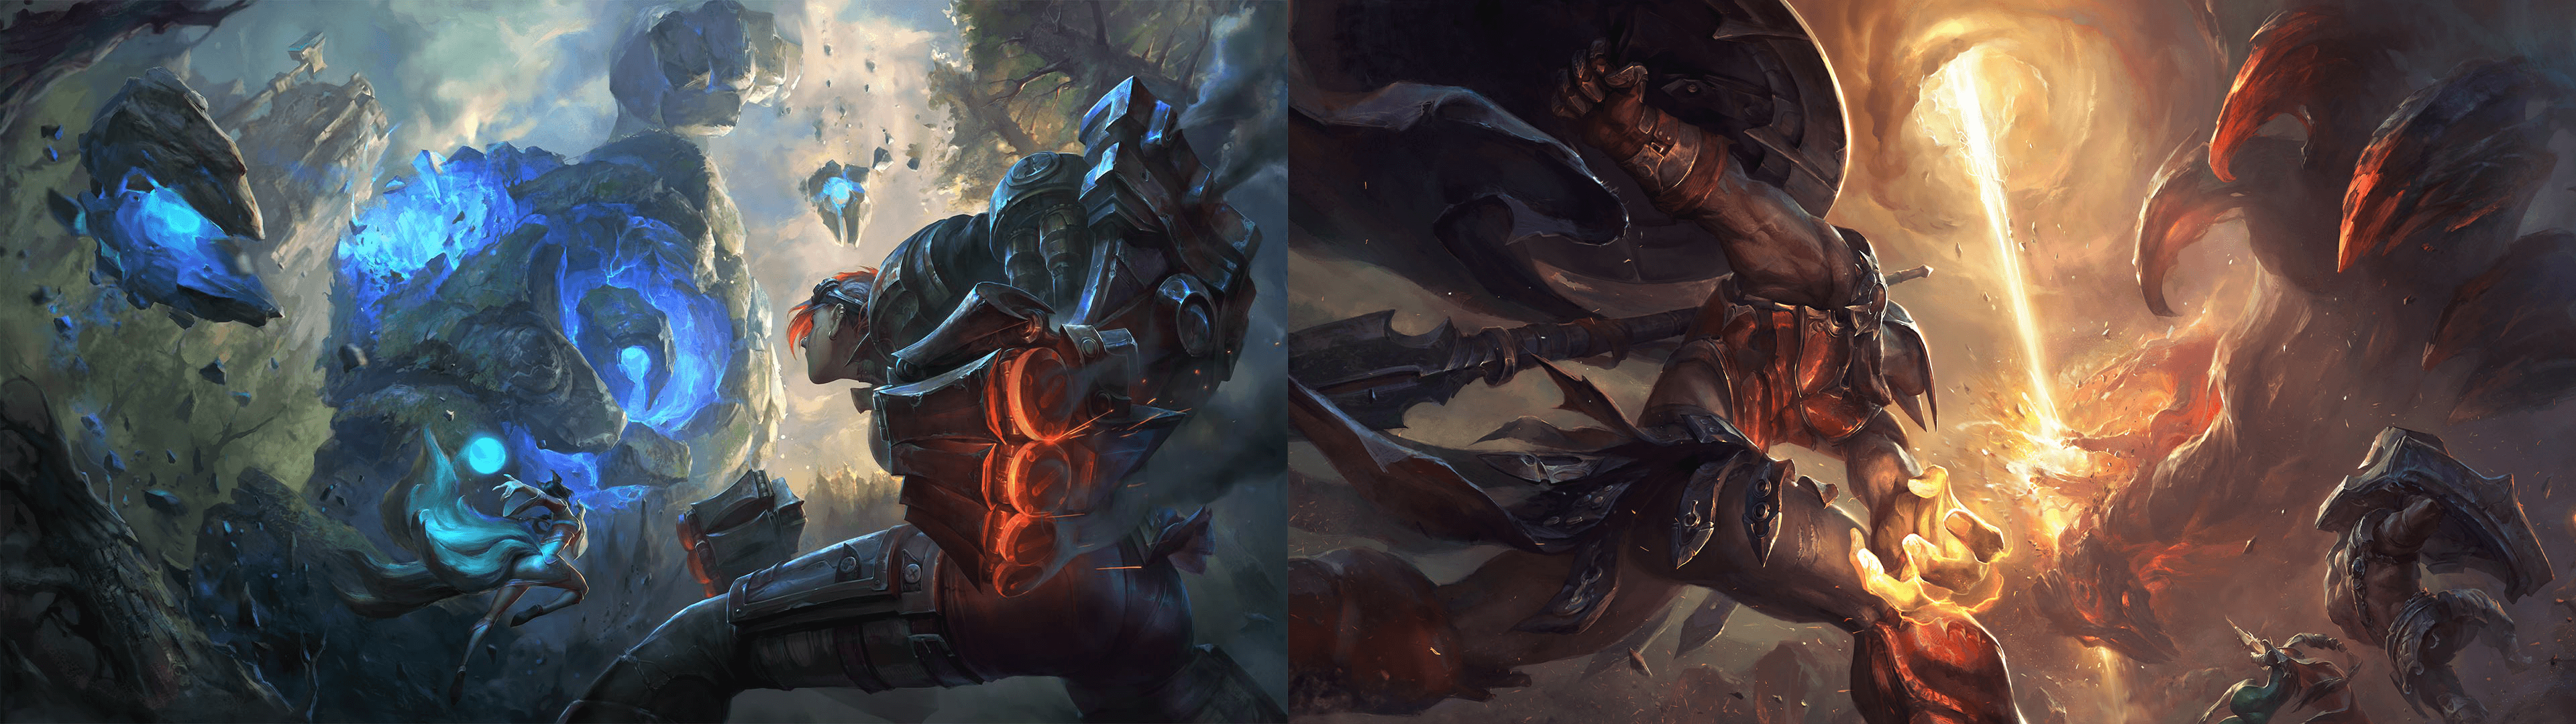 League Of Legends Dual Monitor Wallpapers